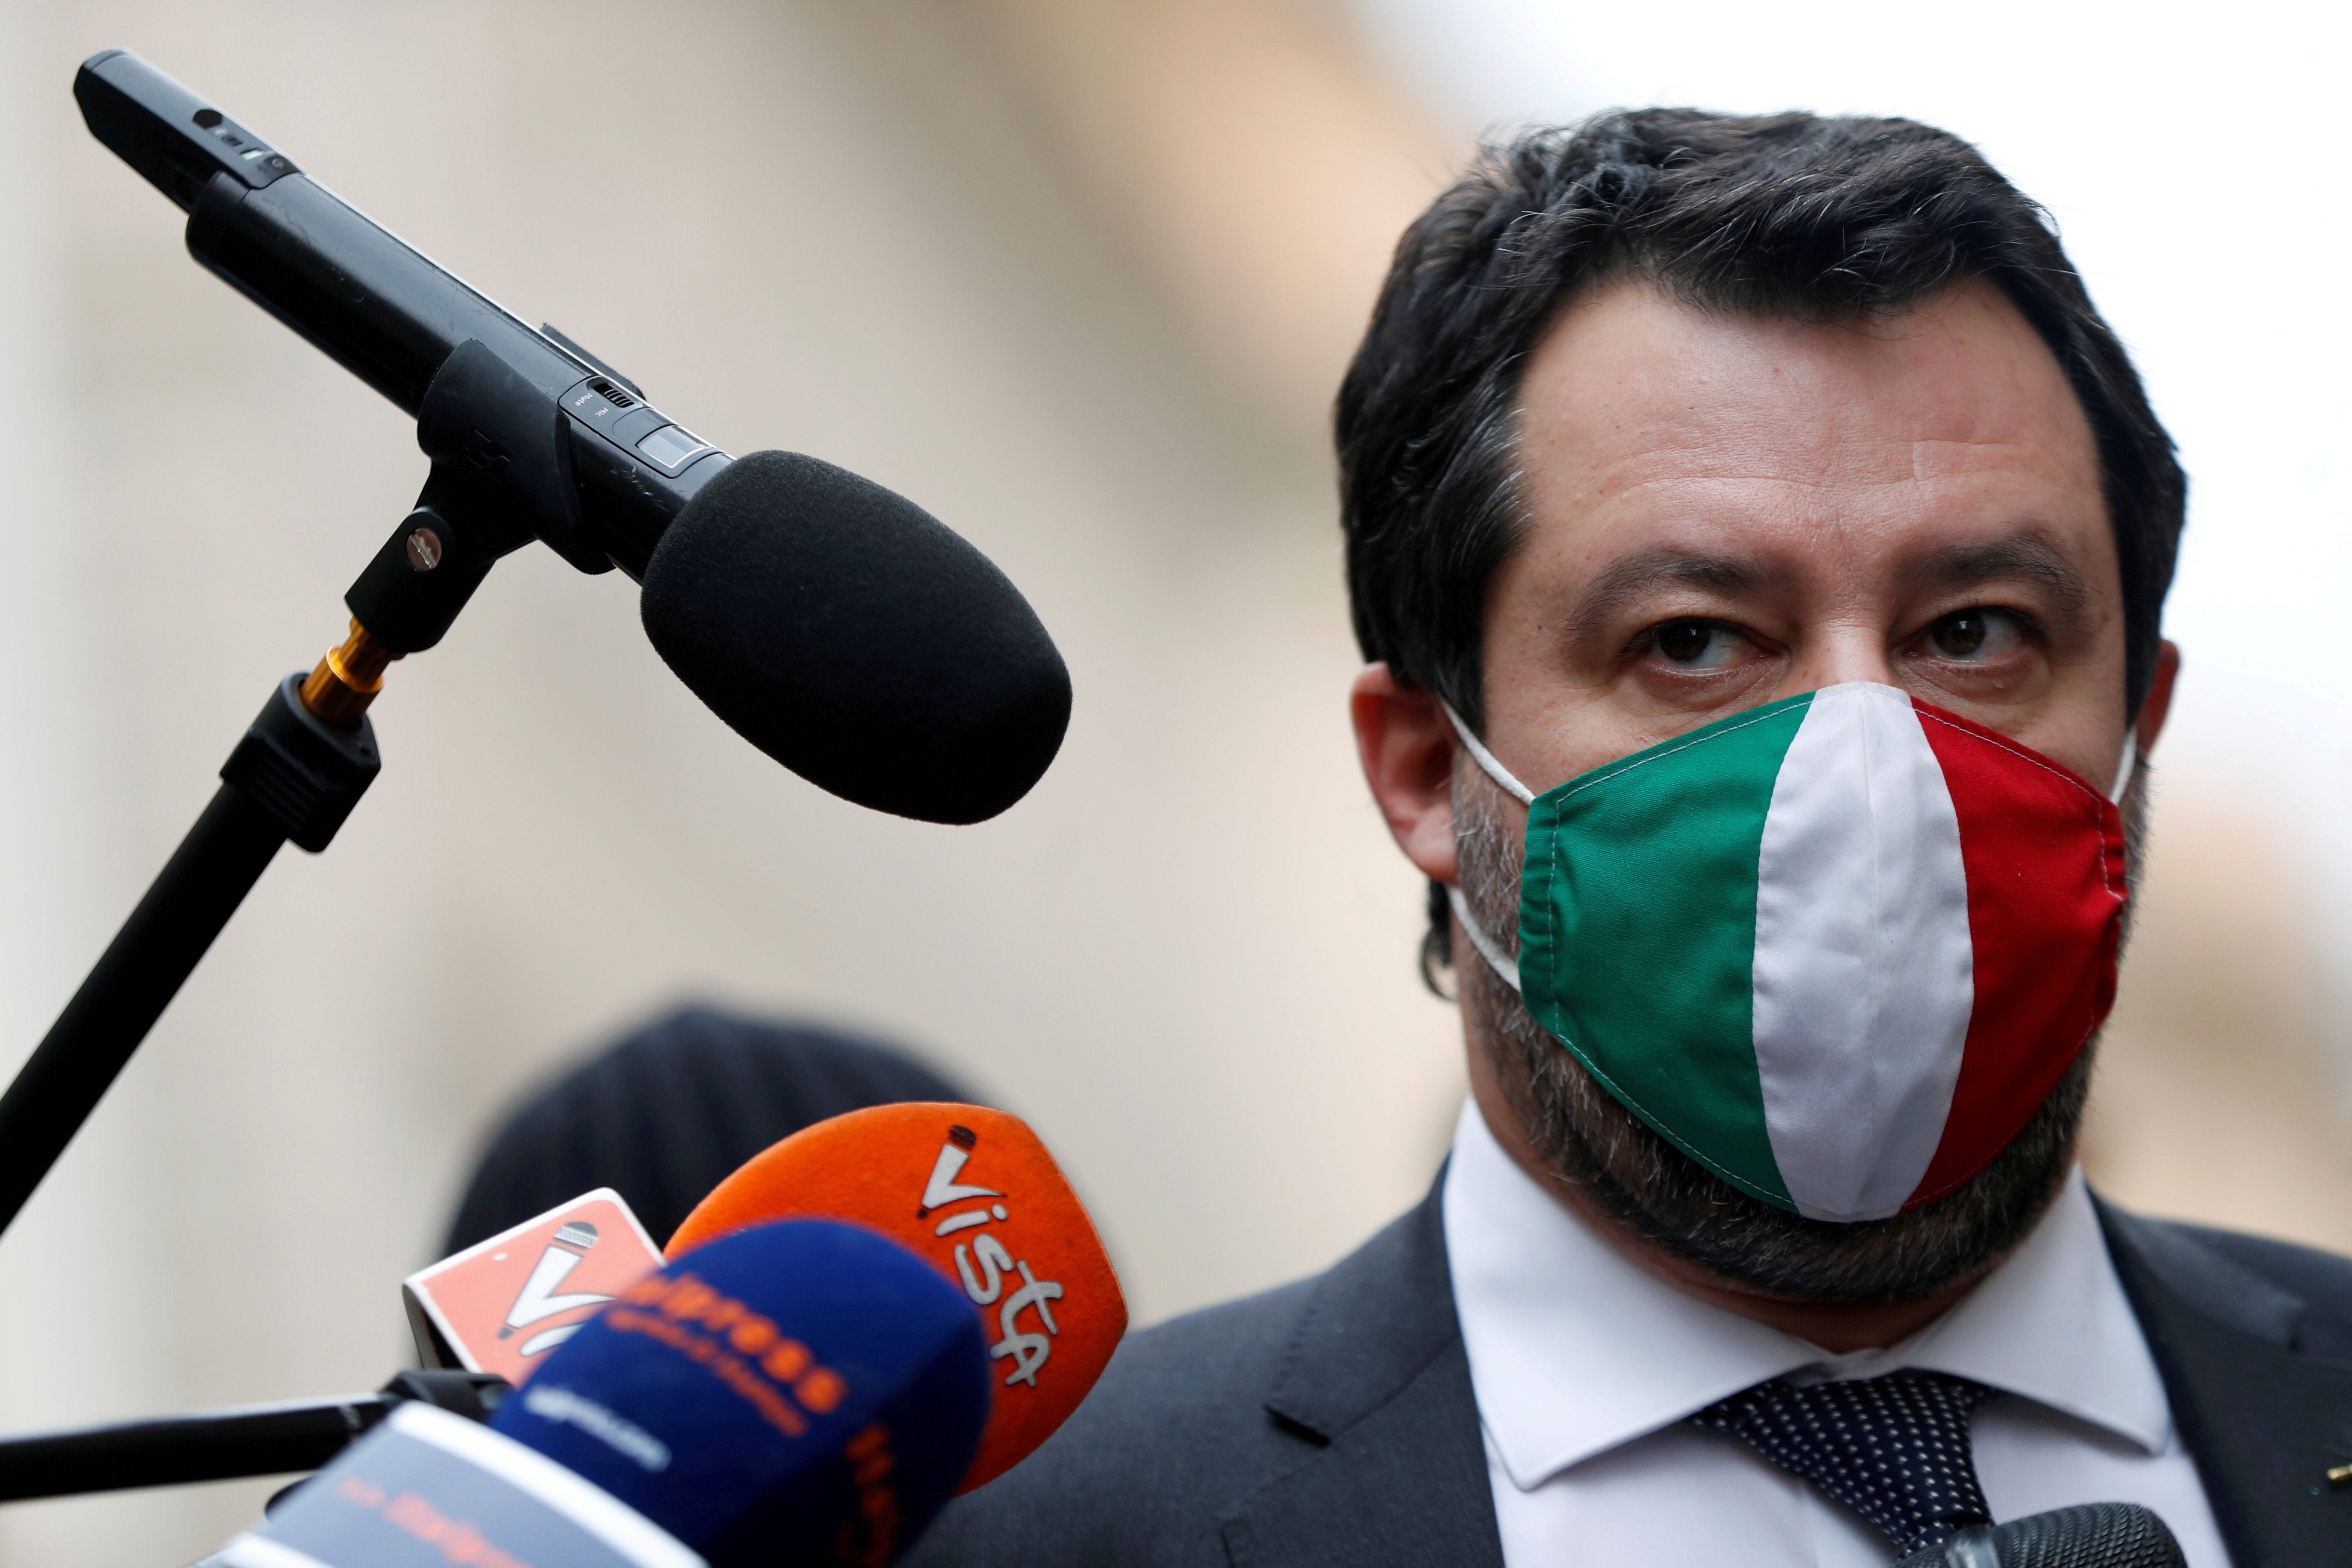 Leader of Italy's far-right League party Matteo Salvini speaks to the media in Rome